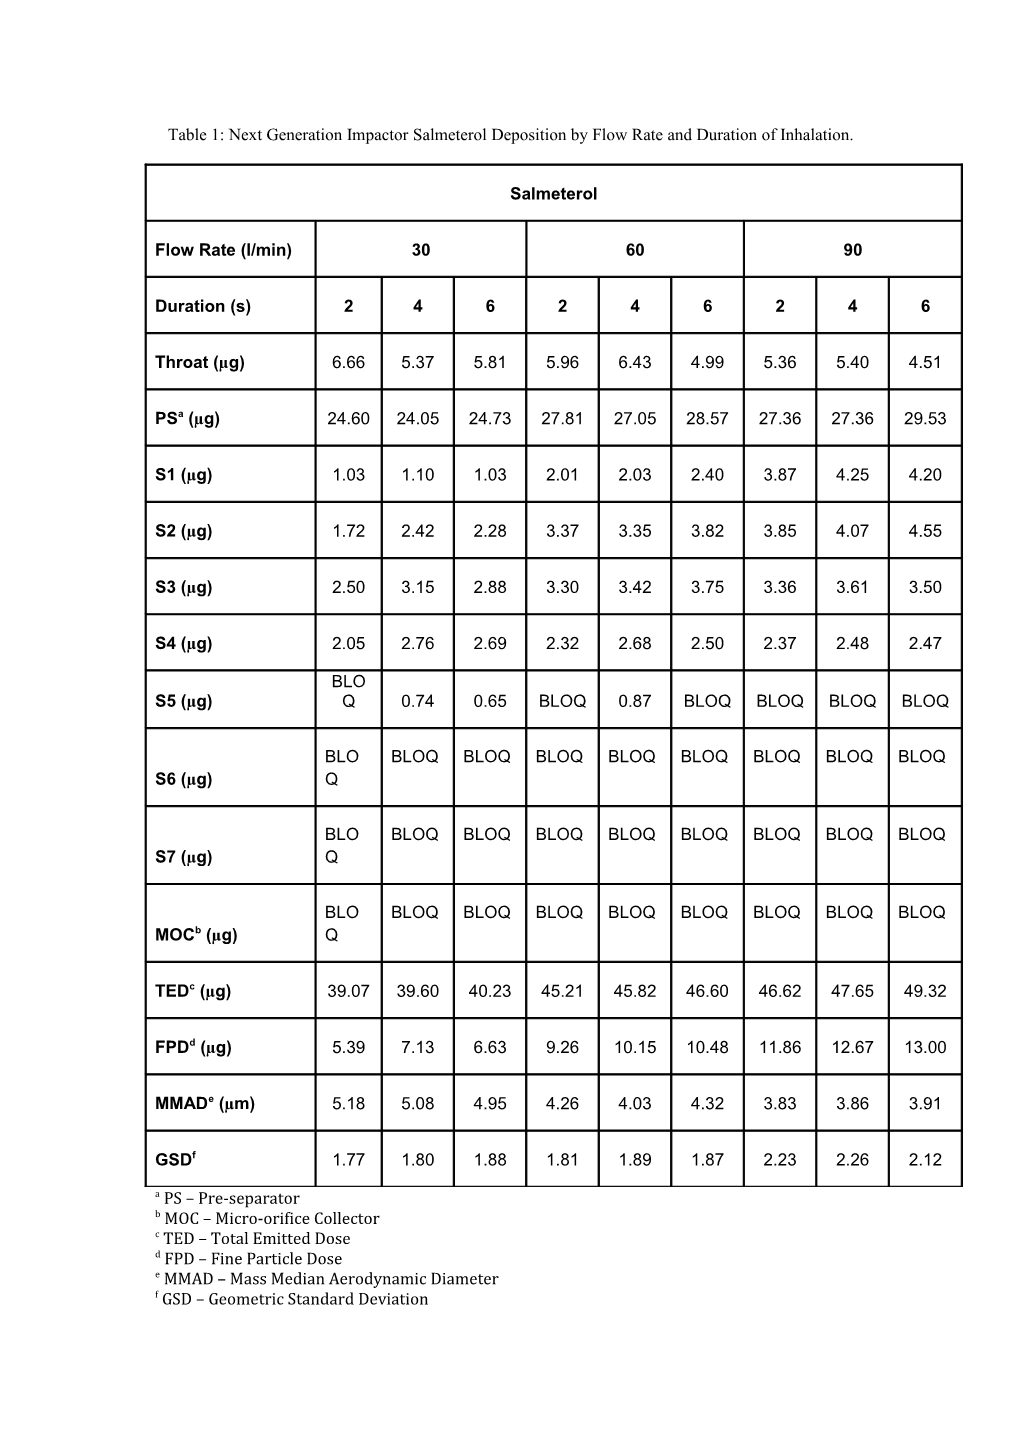 Table 1: Next Generation Impactor Salmeterol Deposition by Flow Rate and Duration of Inhalation